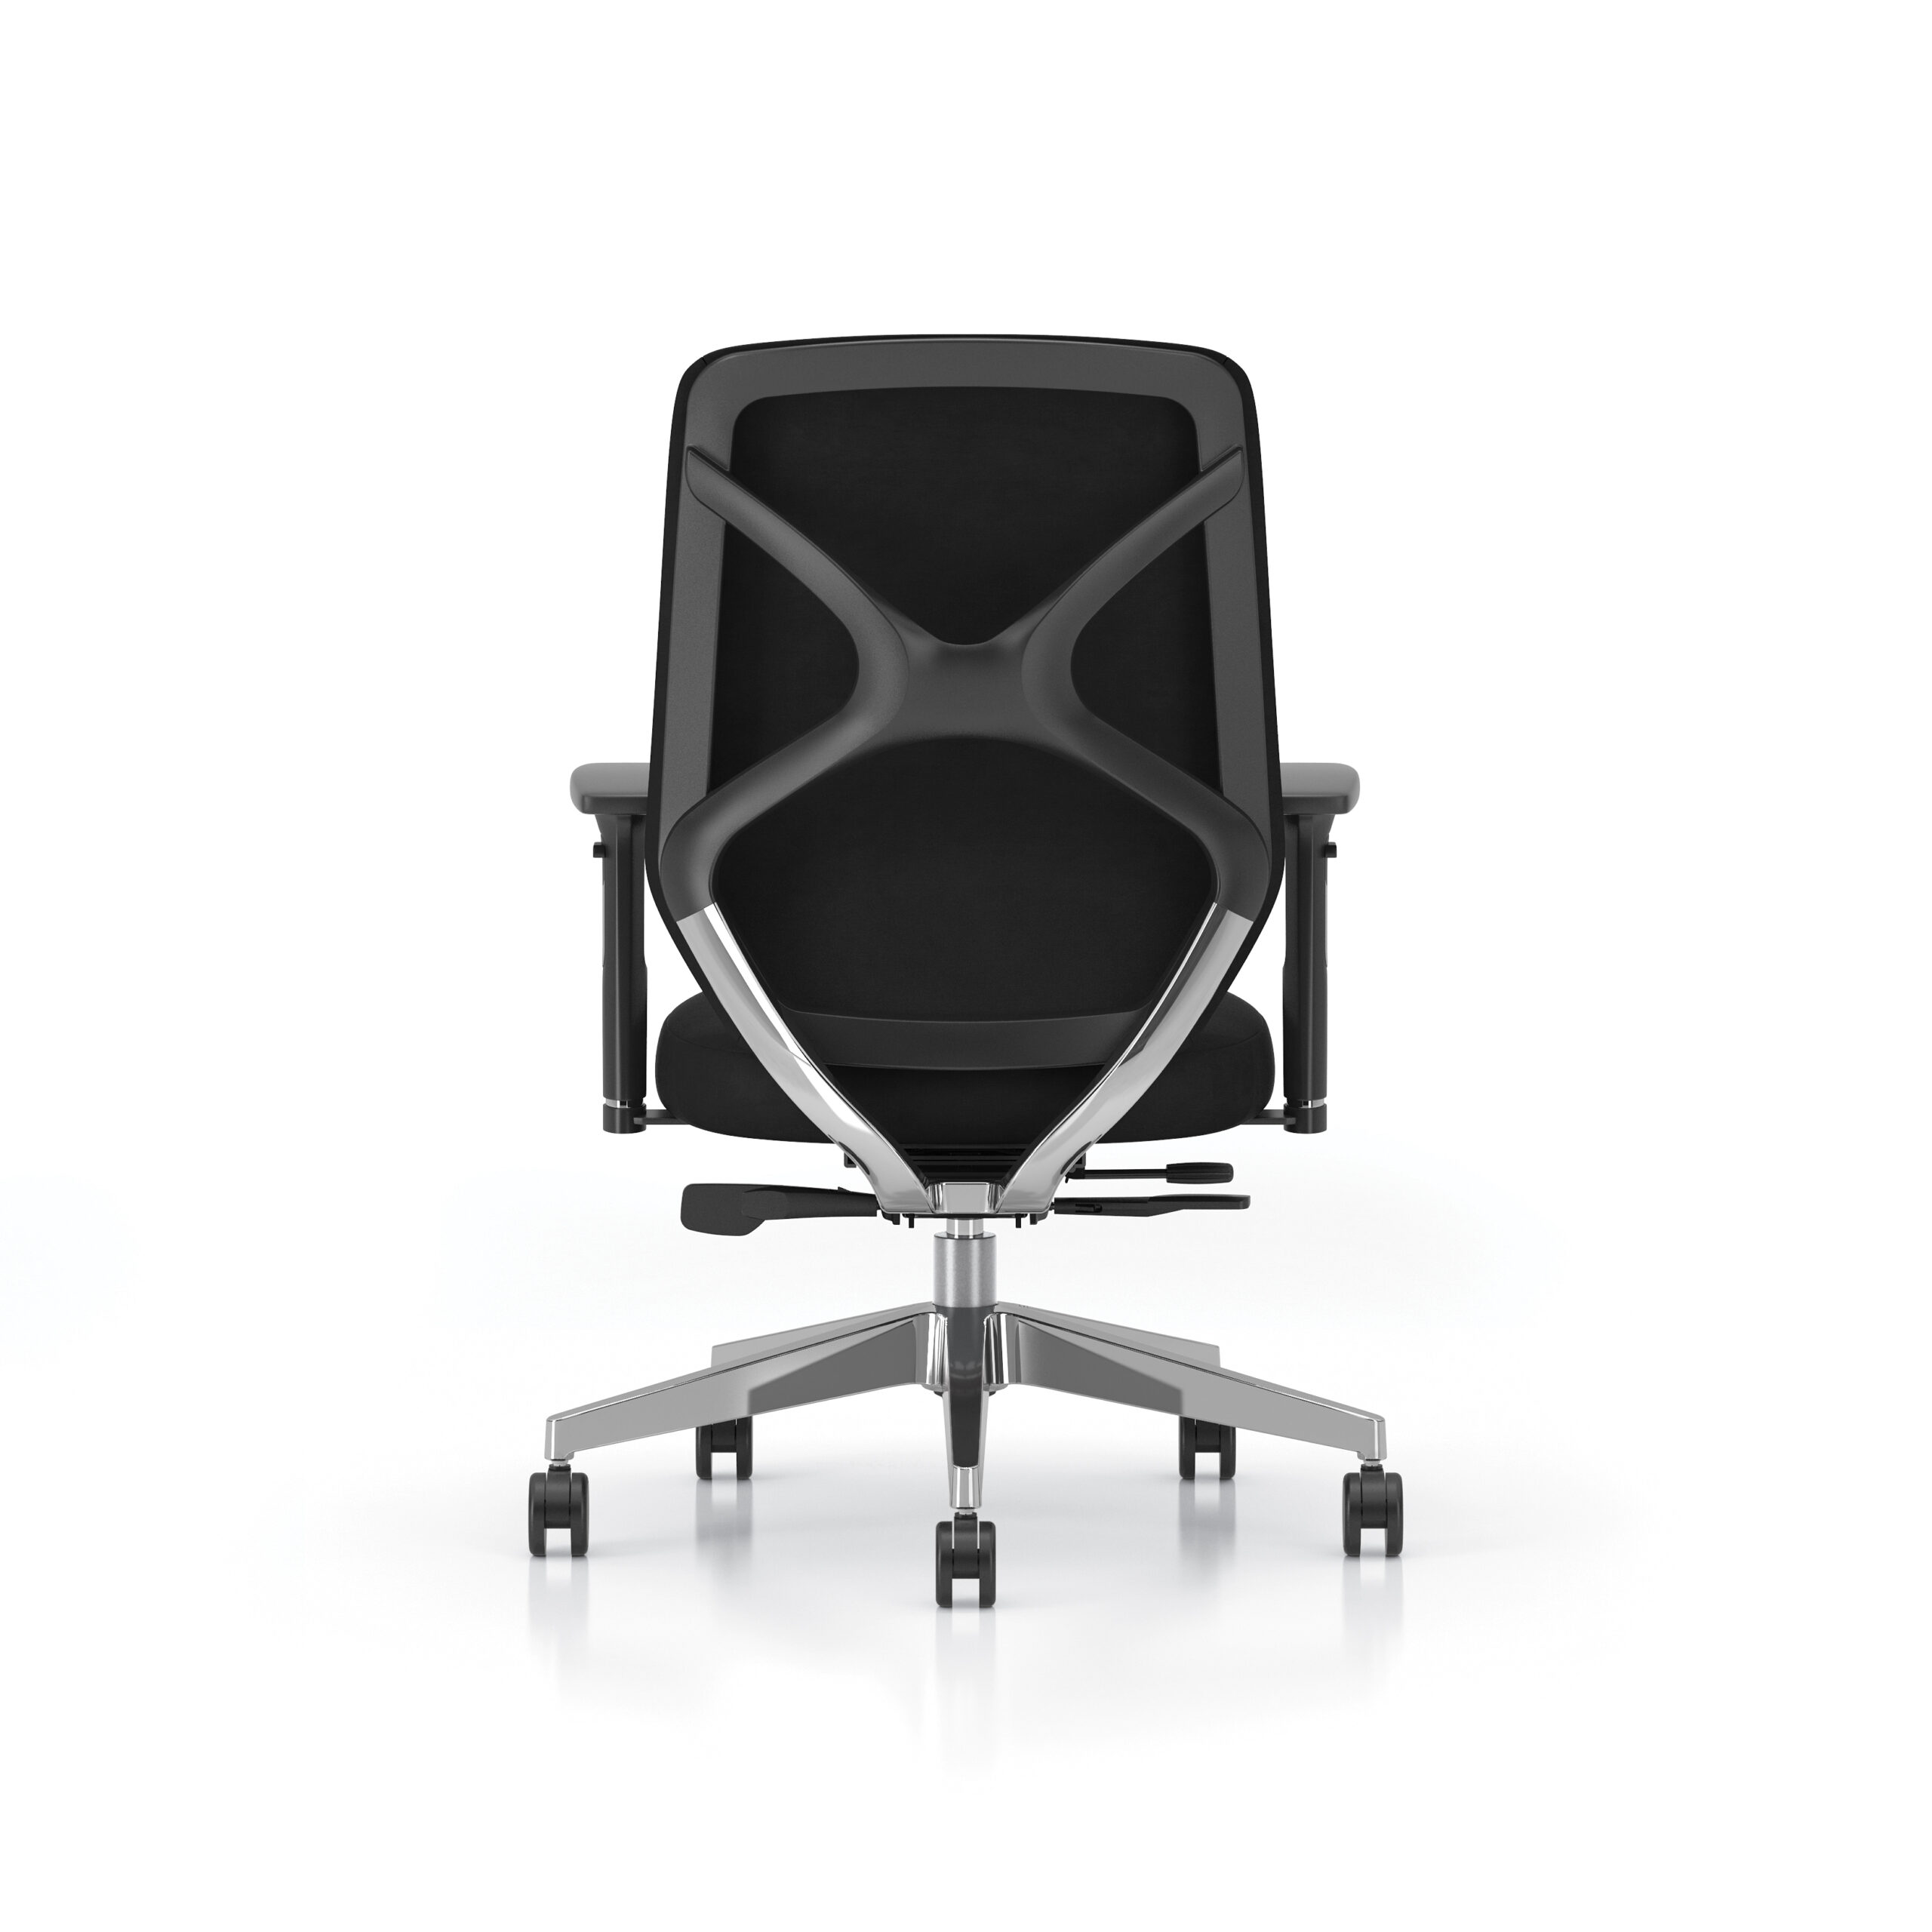 Callisto_Back-Front-UPH_Final_Mikmaq_Office_Furniture-scaled-1.jpg